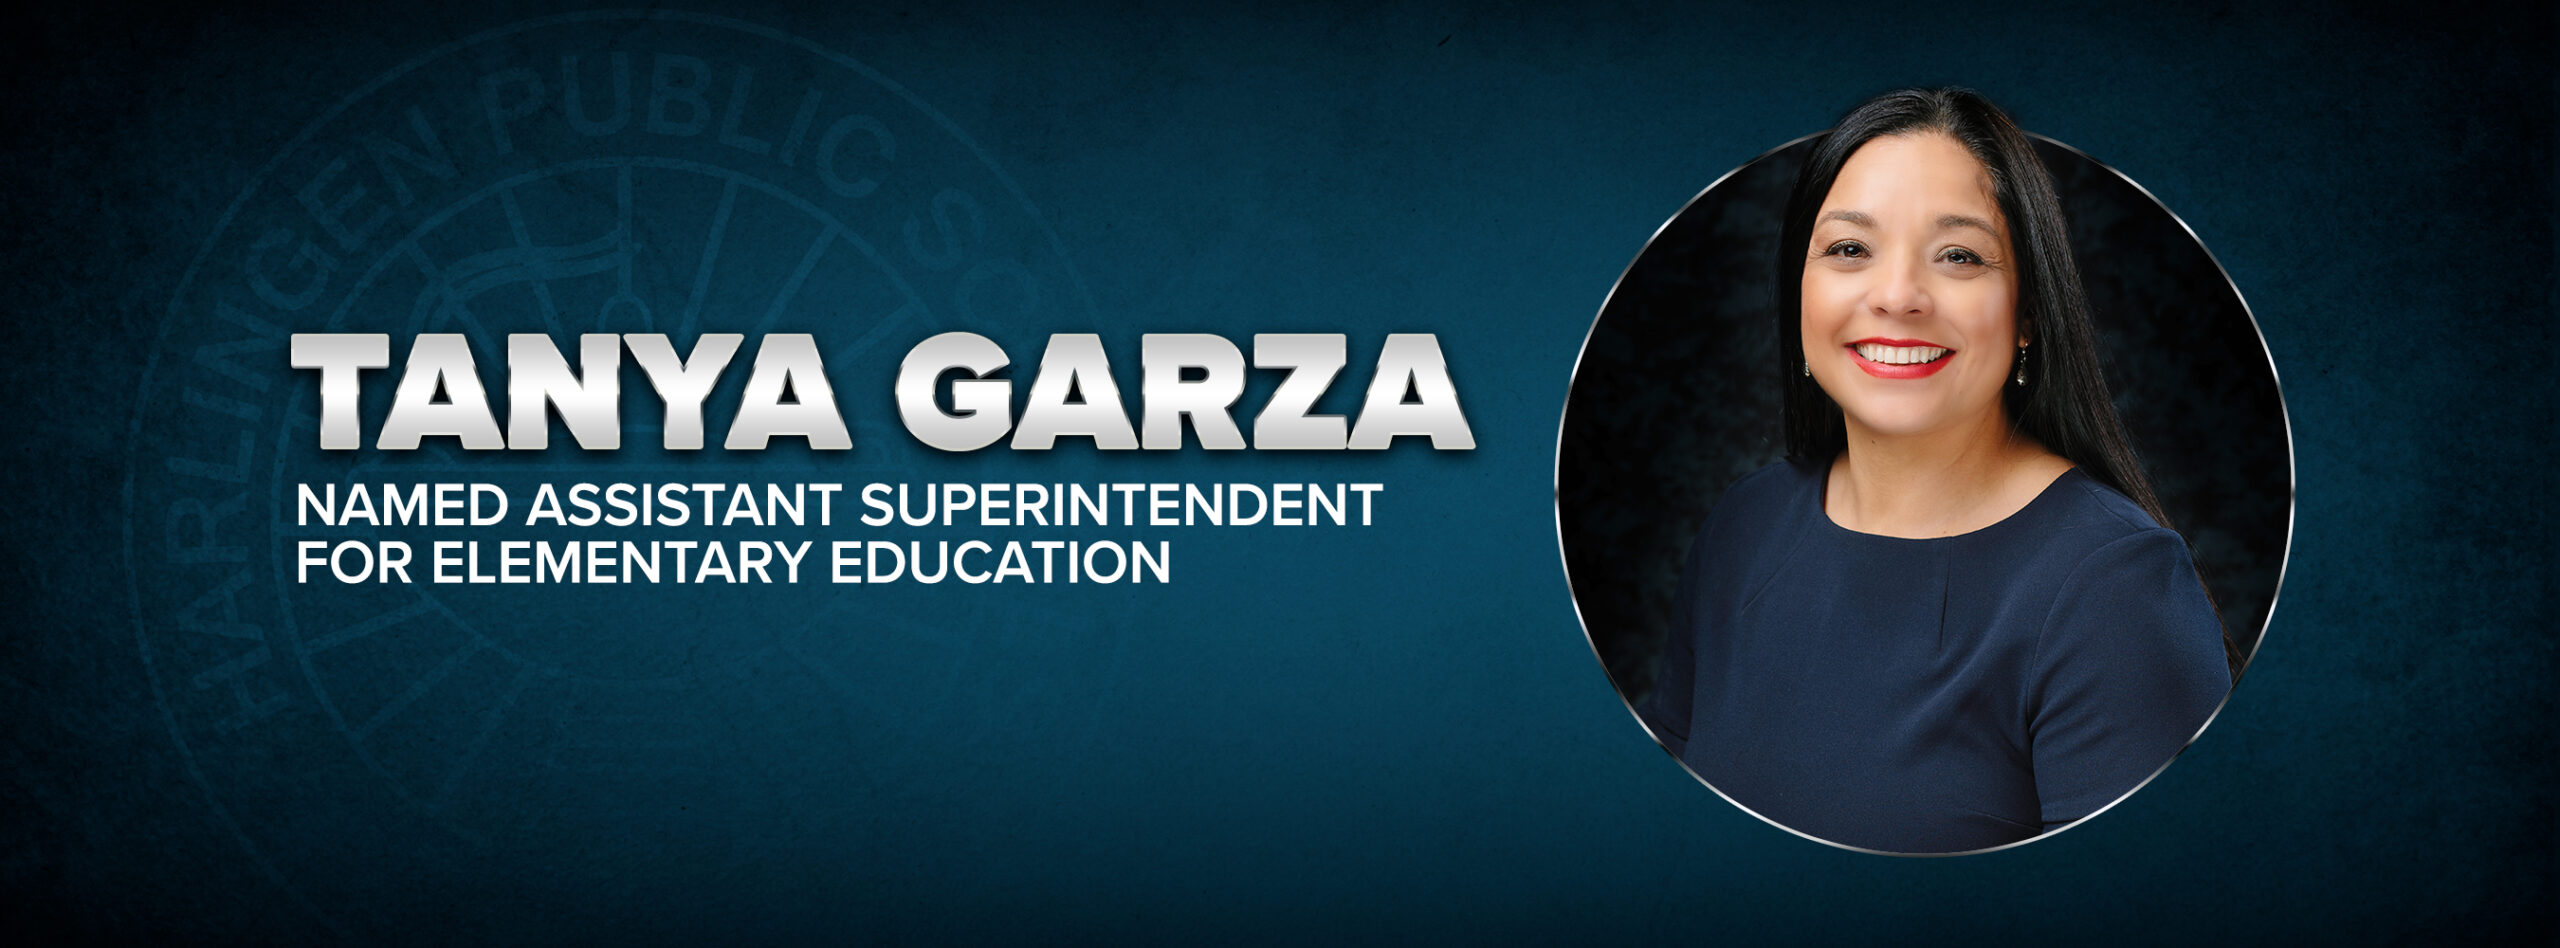 Tanya Garza named Assistant Superintendent for Elementary Education